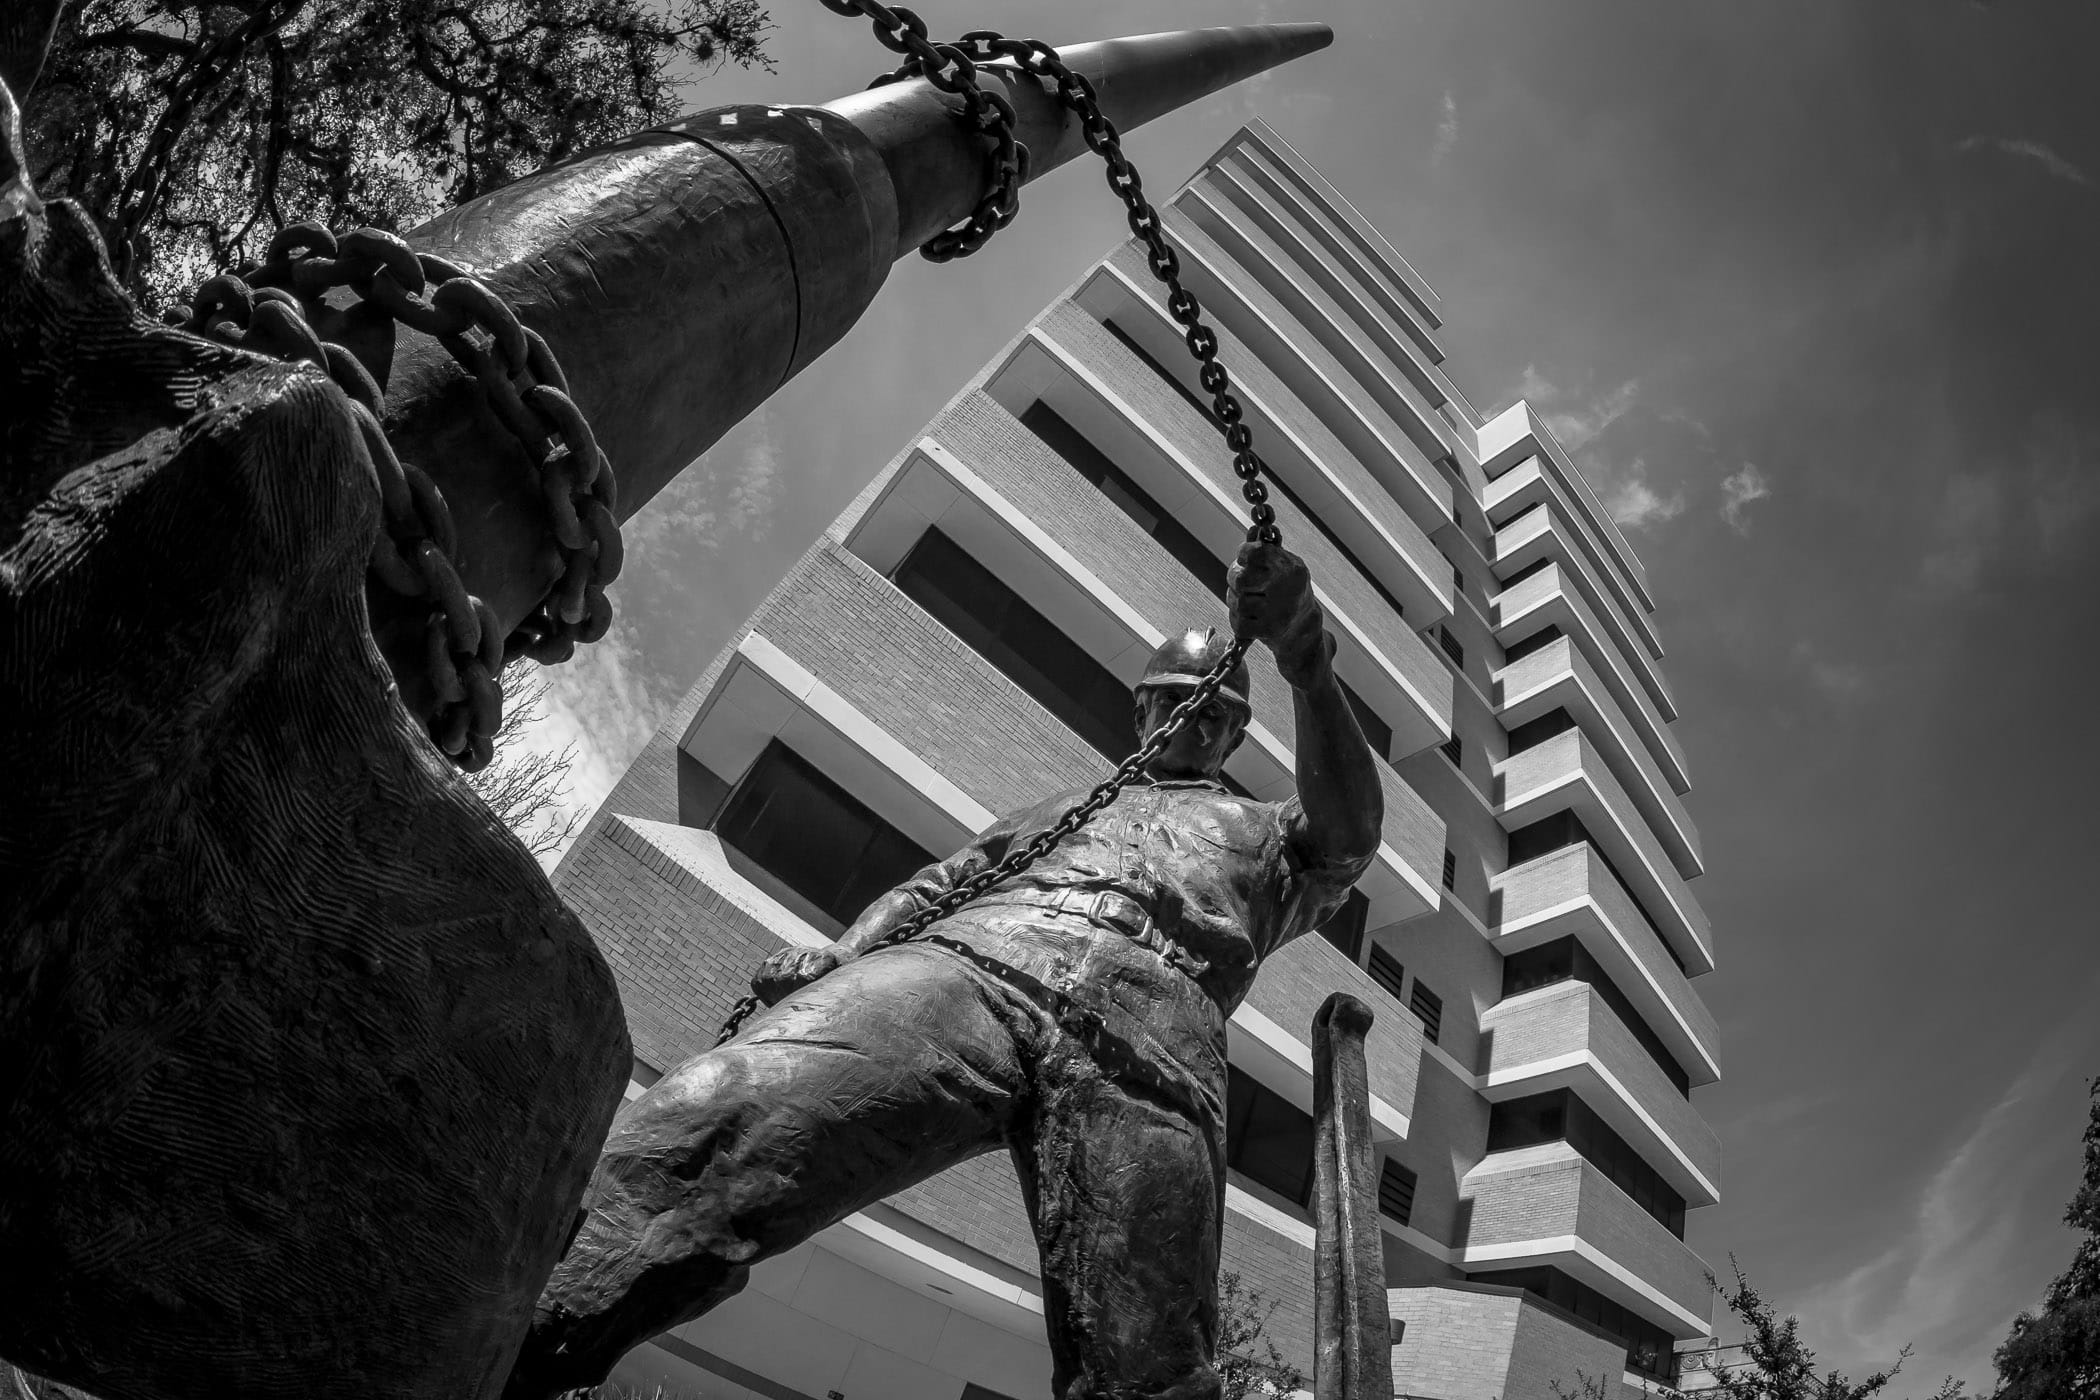 A sculpture of an oilfield worker by noted sculptor Rosie Sandifer outside the Joe C. Richardson Petroleum Engineering Building at Texas A&M University.